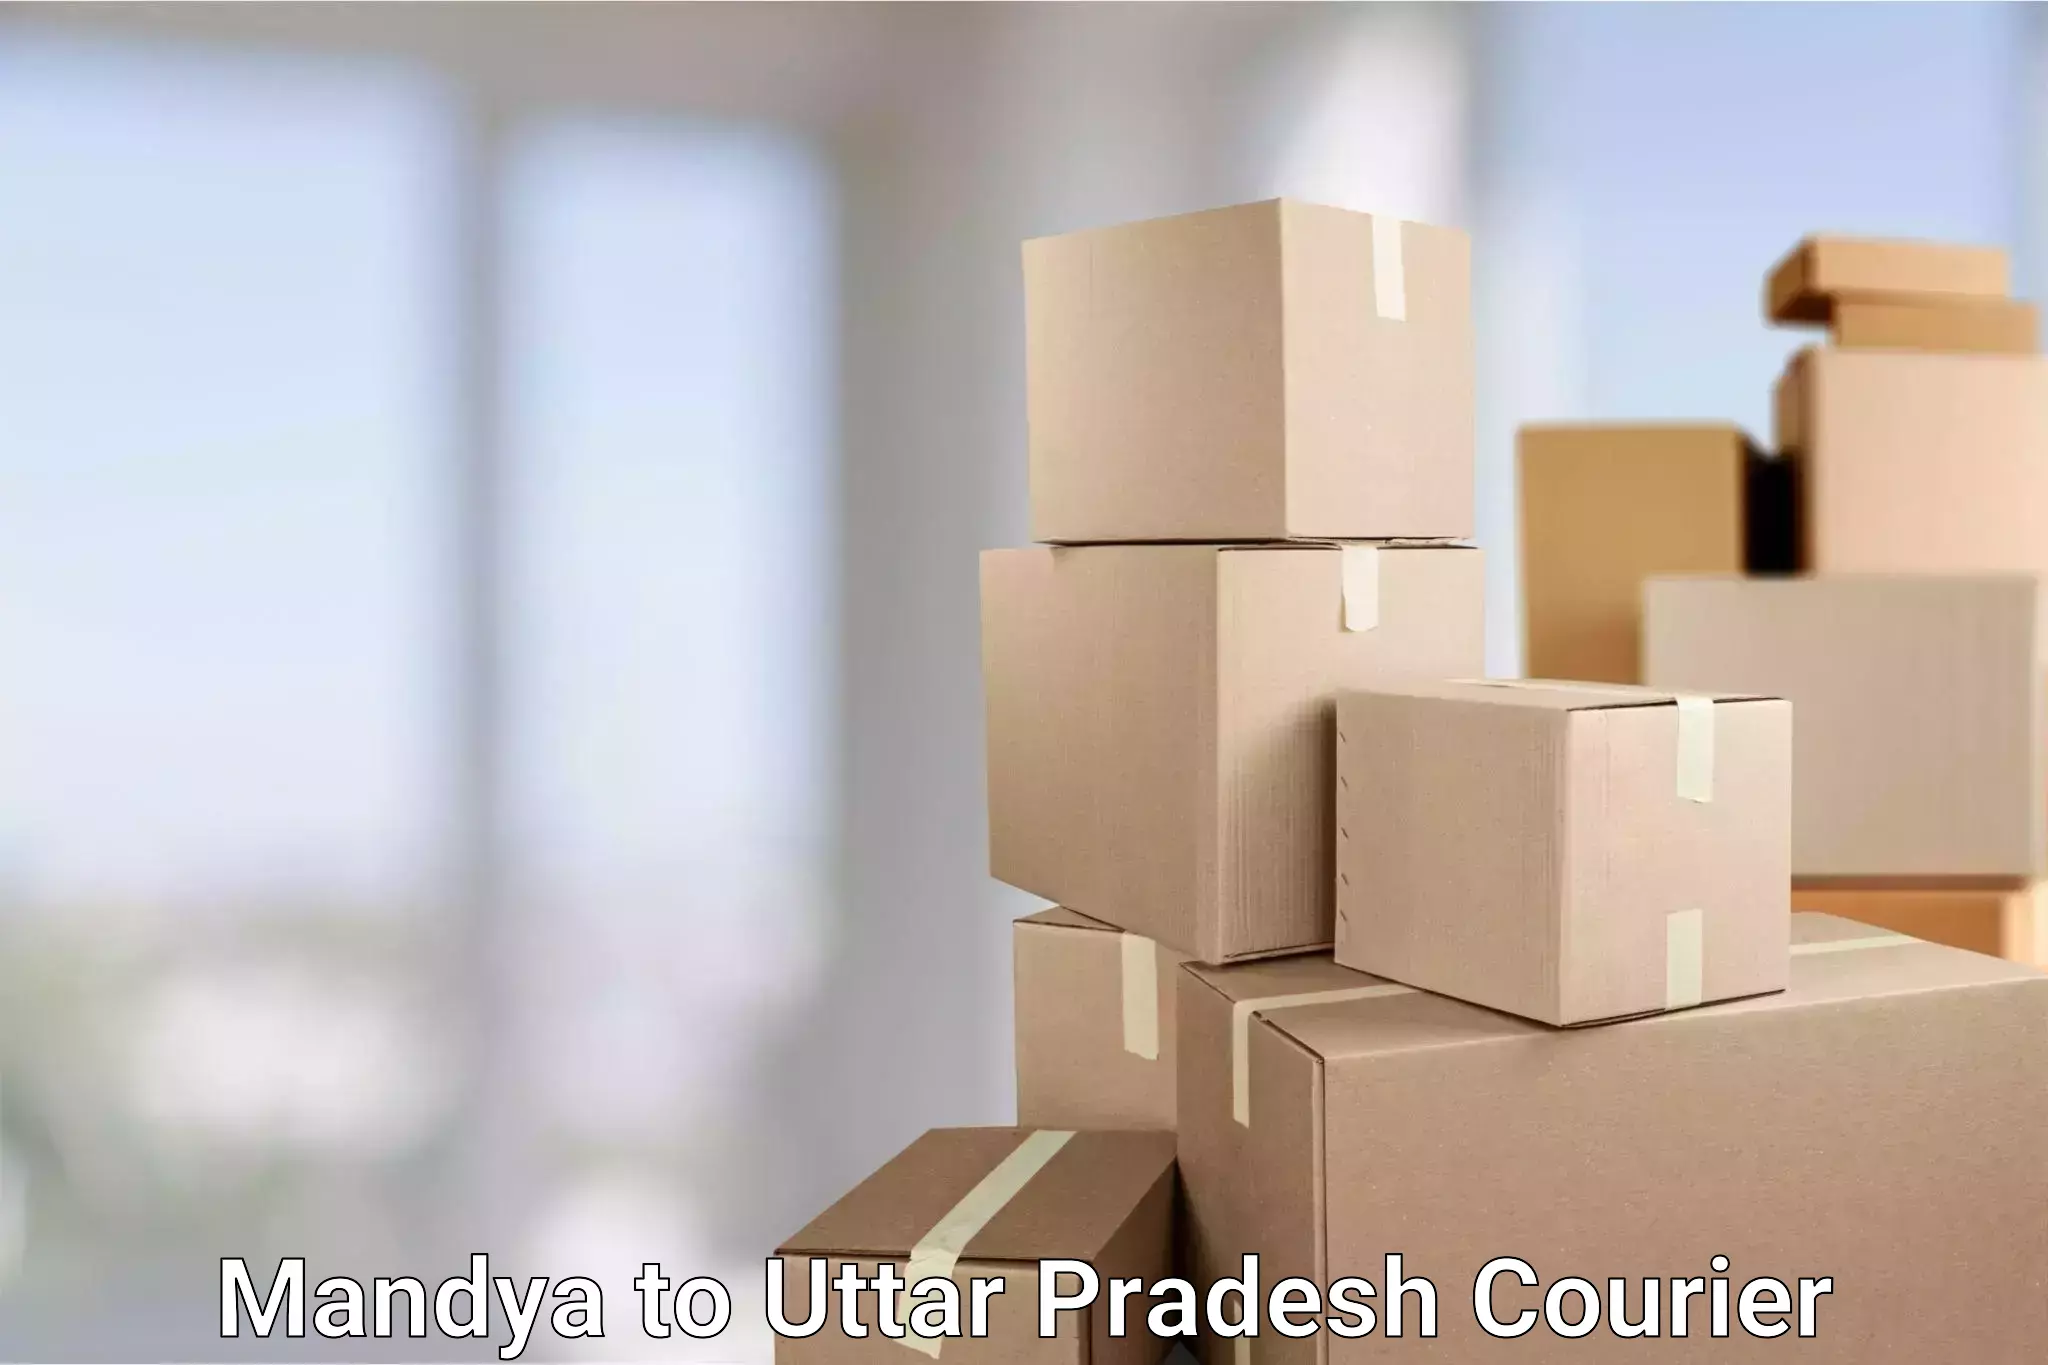 Express package handling Mandya to Lucknow